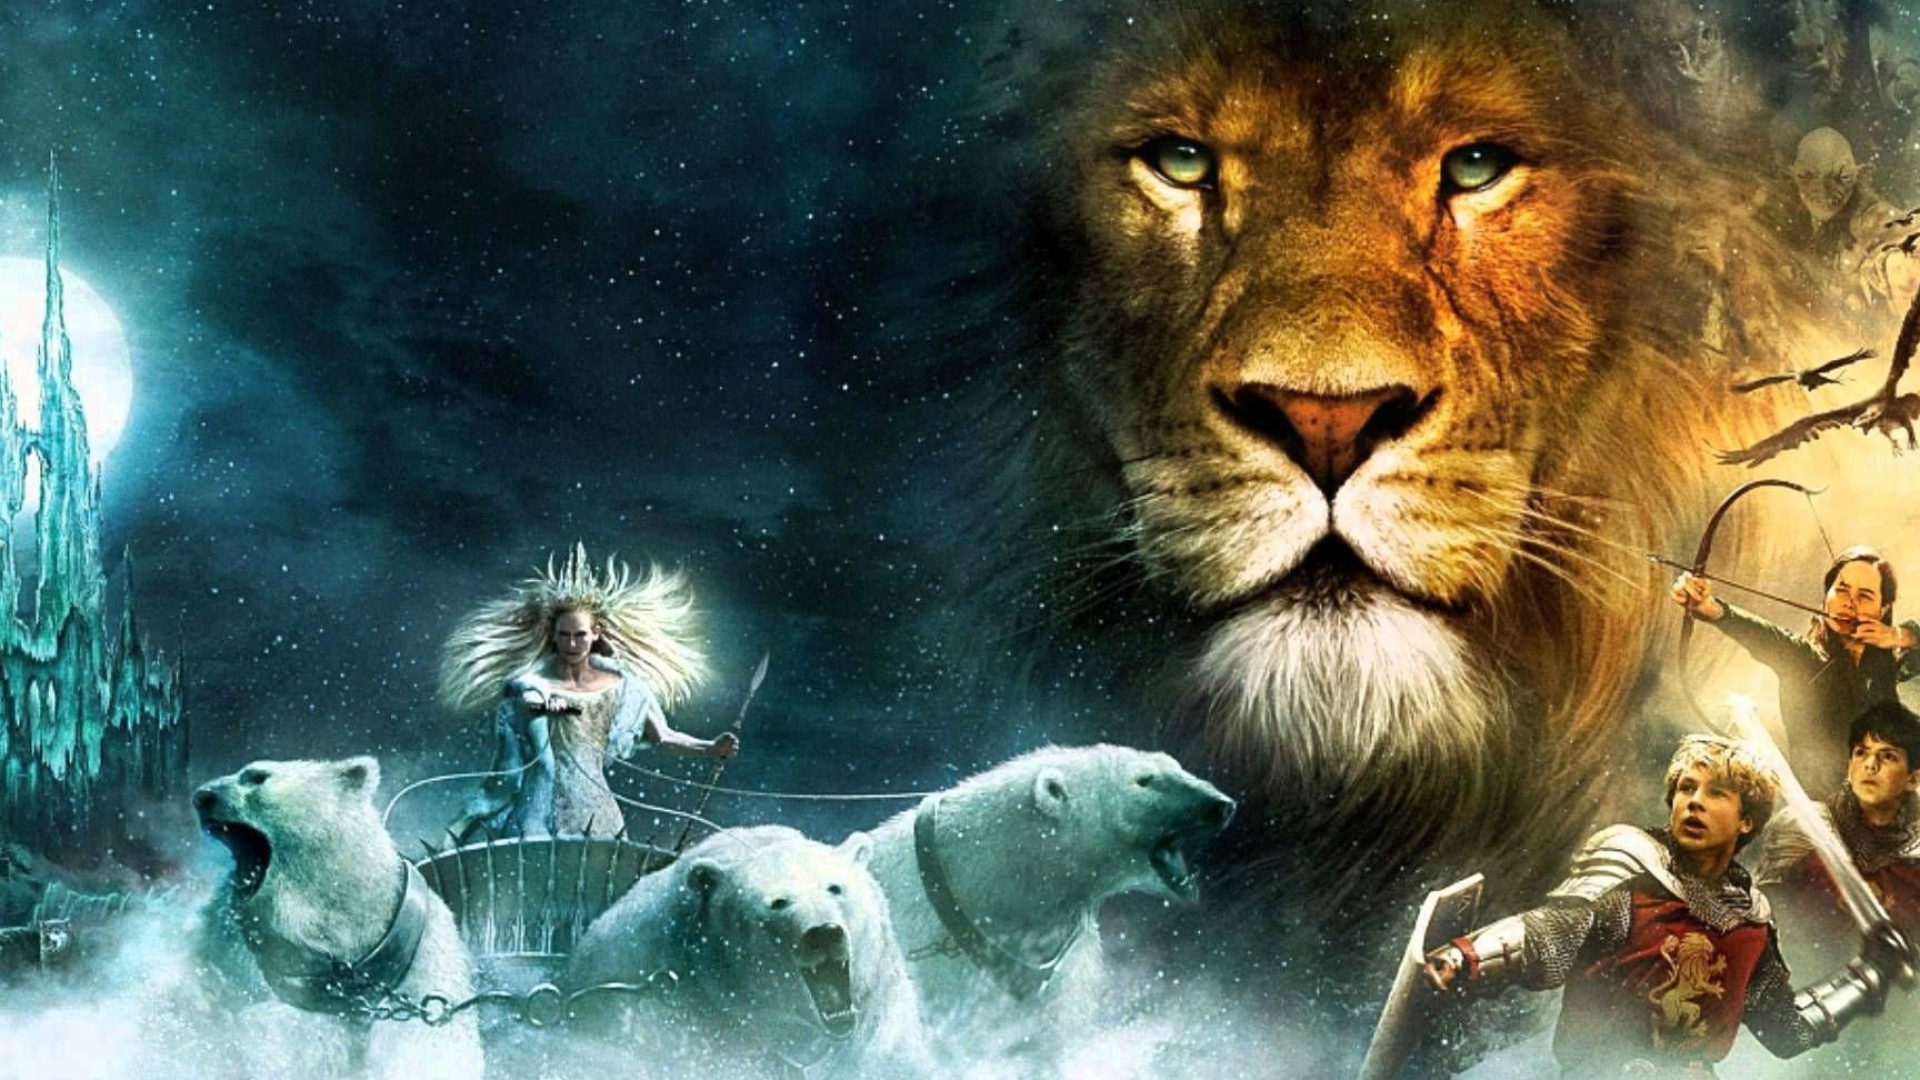 Narnia movies, Fantasy adventure, Magical wardrobe, Lion and witch, 1920x1080 Full HD Desktop